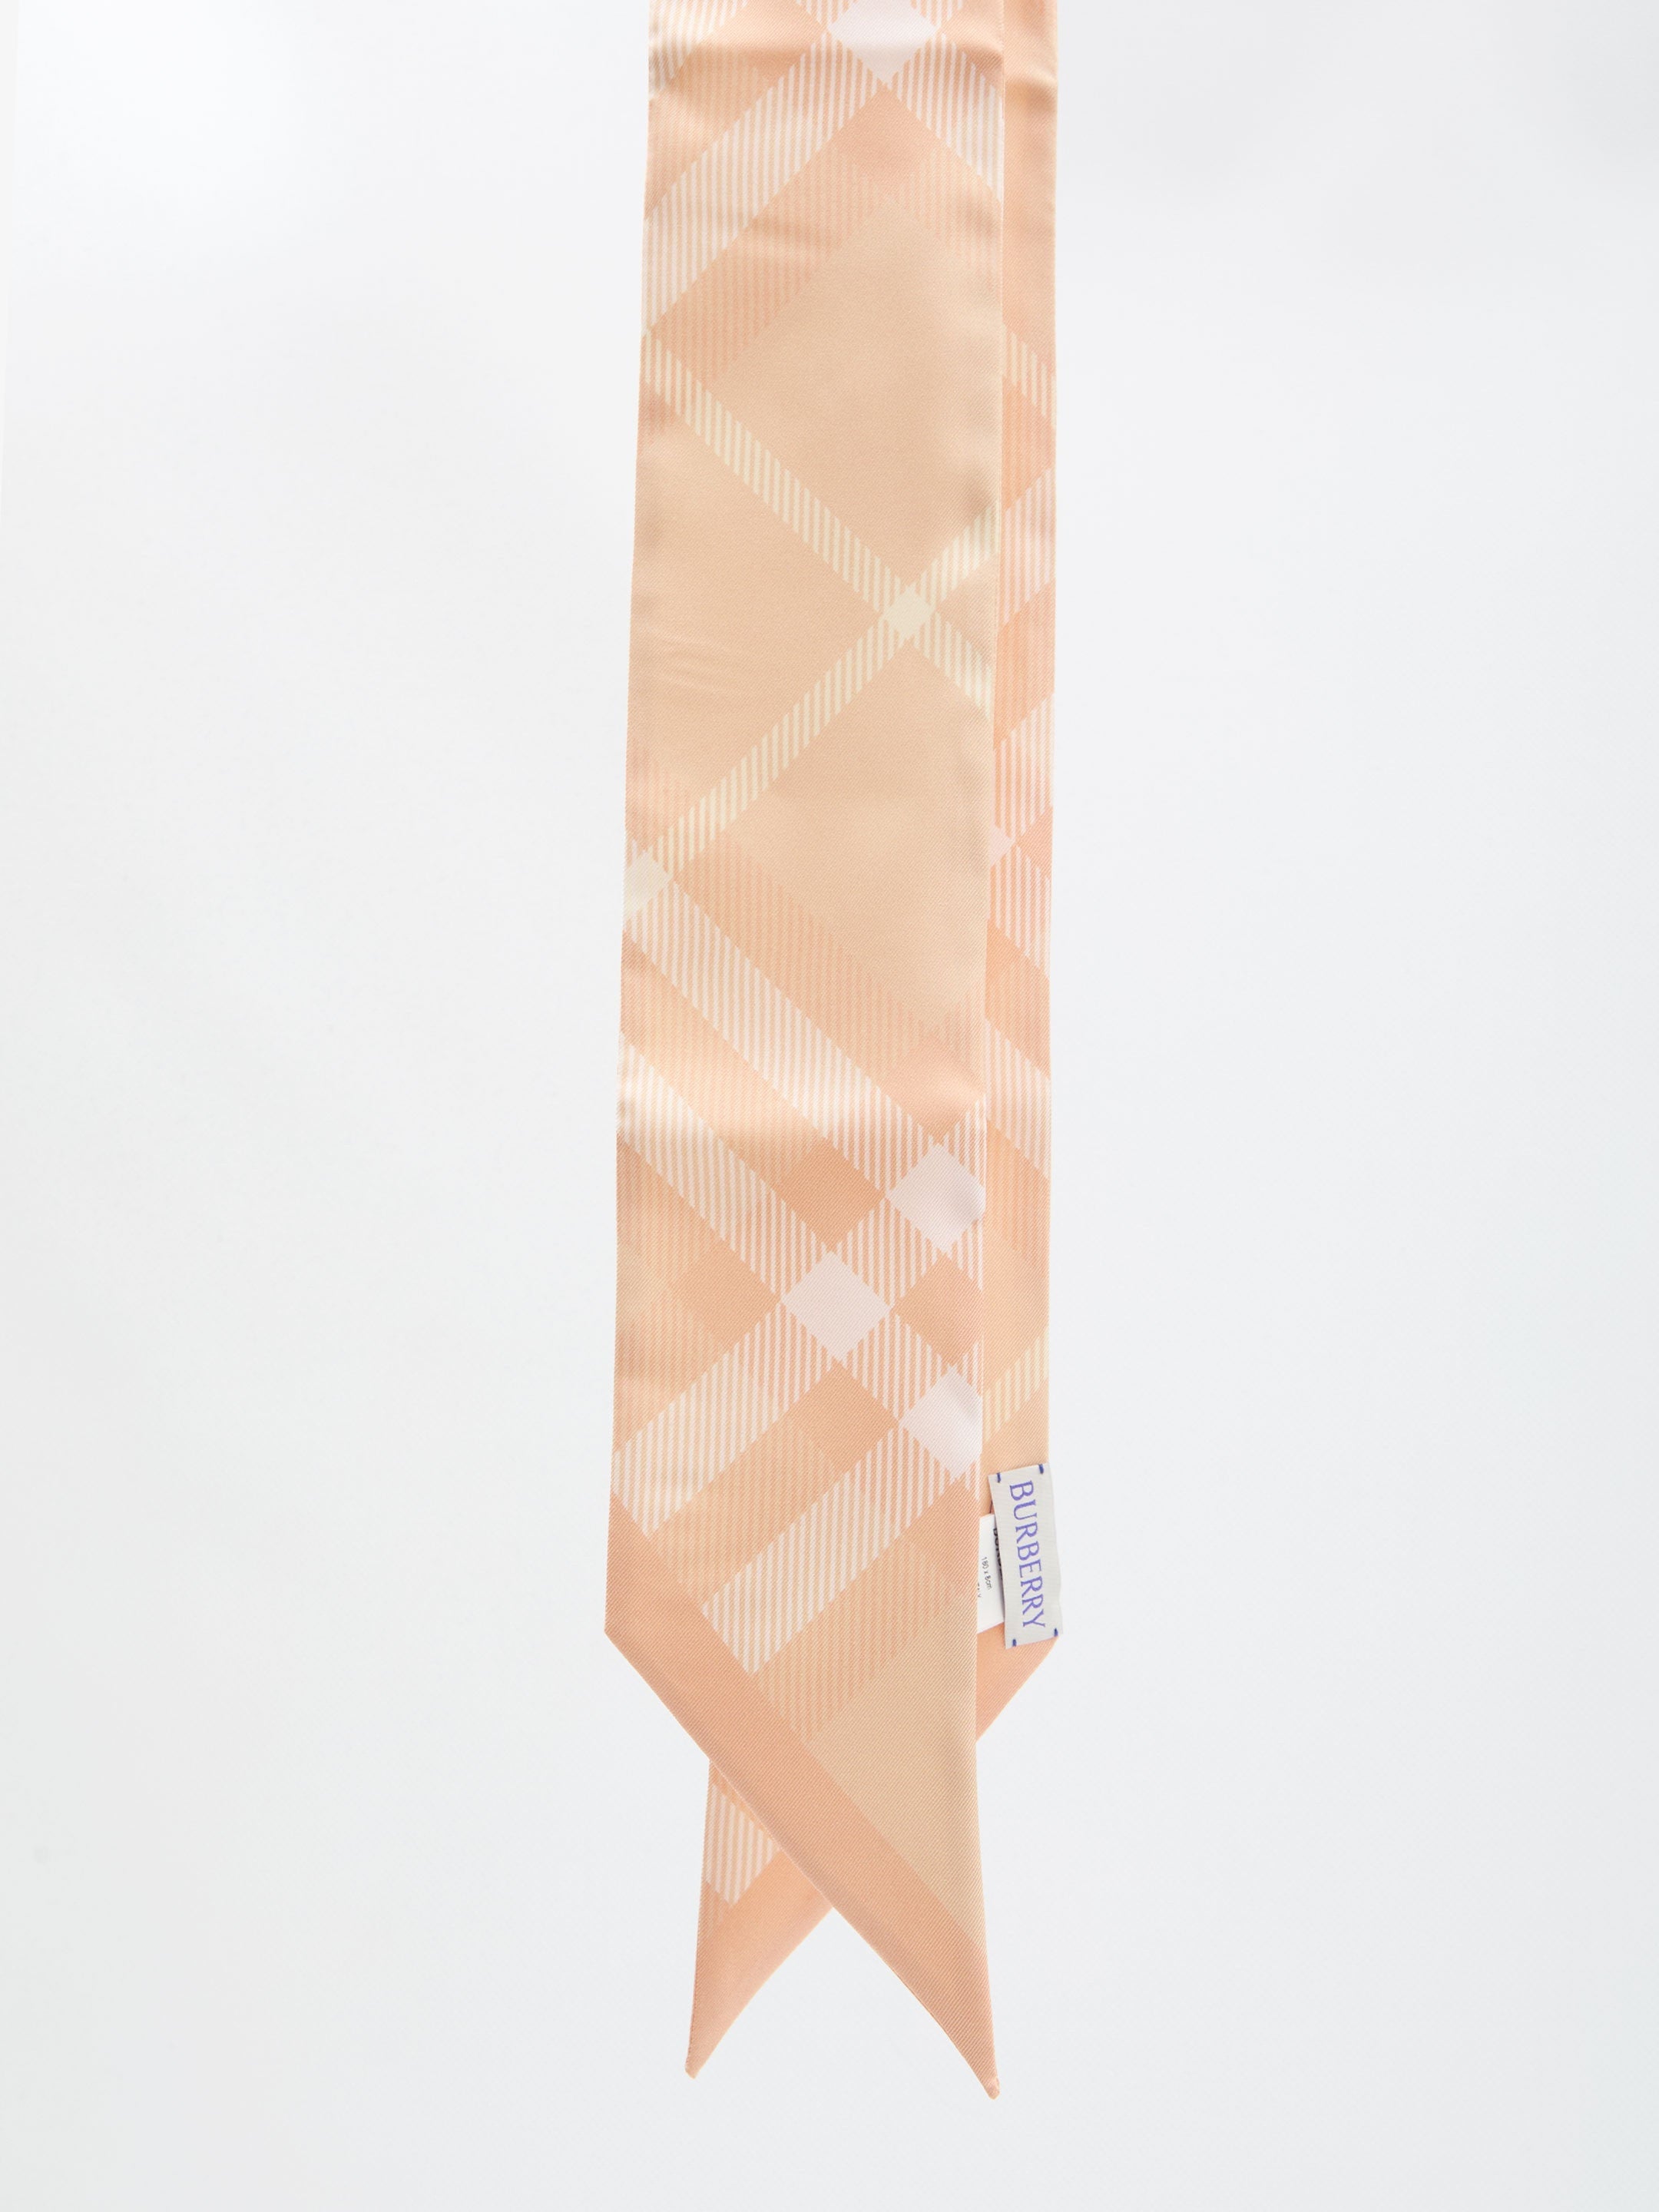 BURBERRY-OUTLET-SALE-Skinny-Check-scarf-Schals-Tucher-QT-PINK-ARCHIVE-COLLECTION-2.jpg